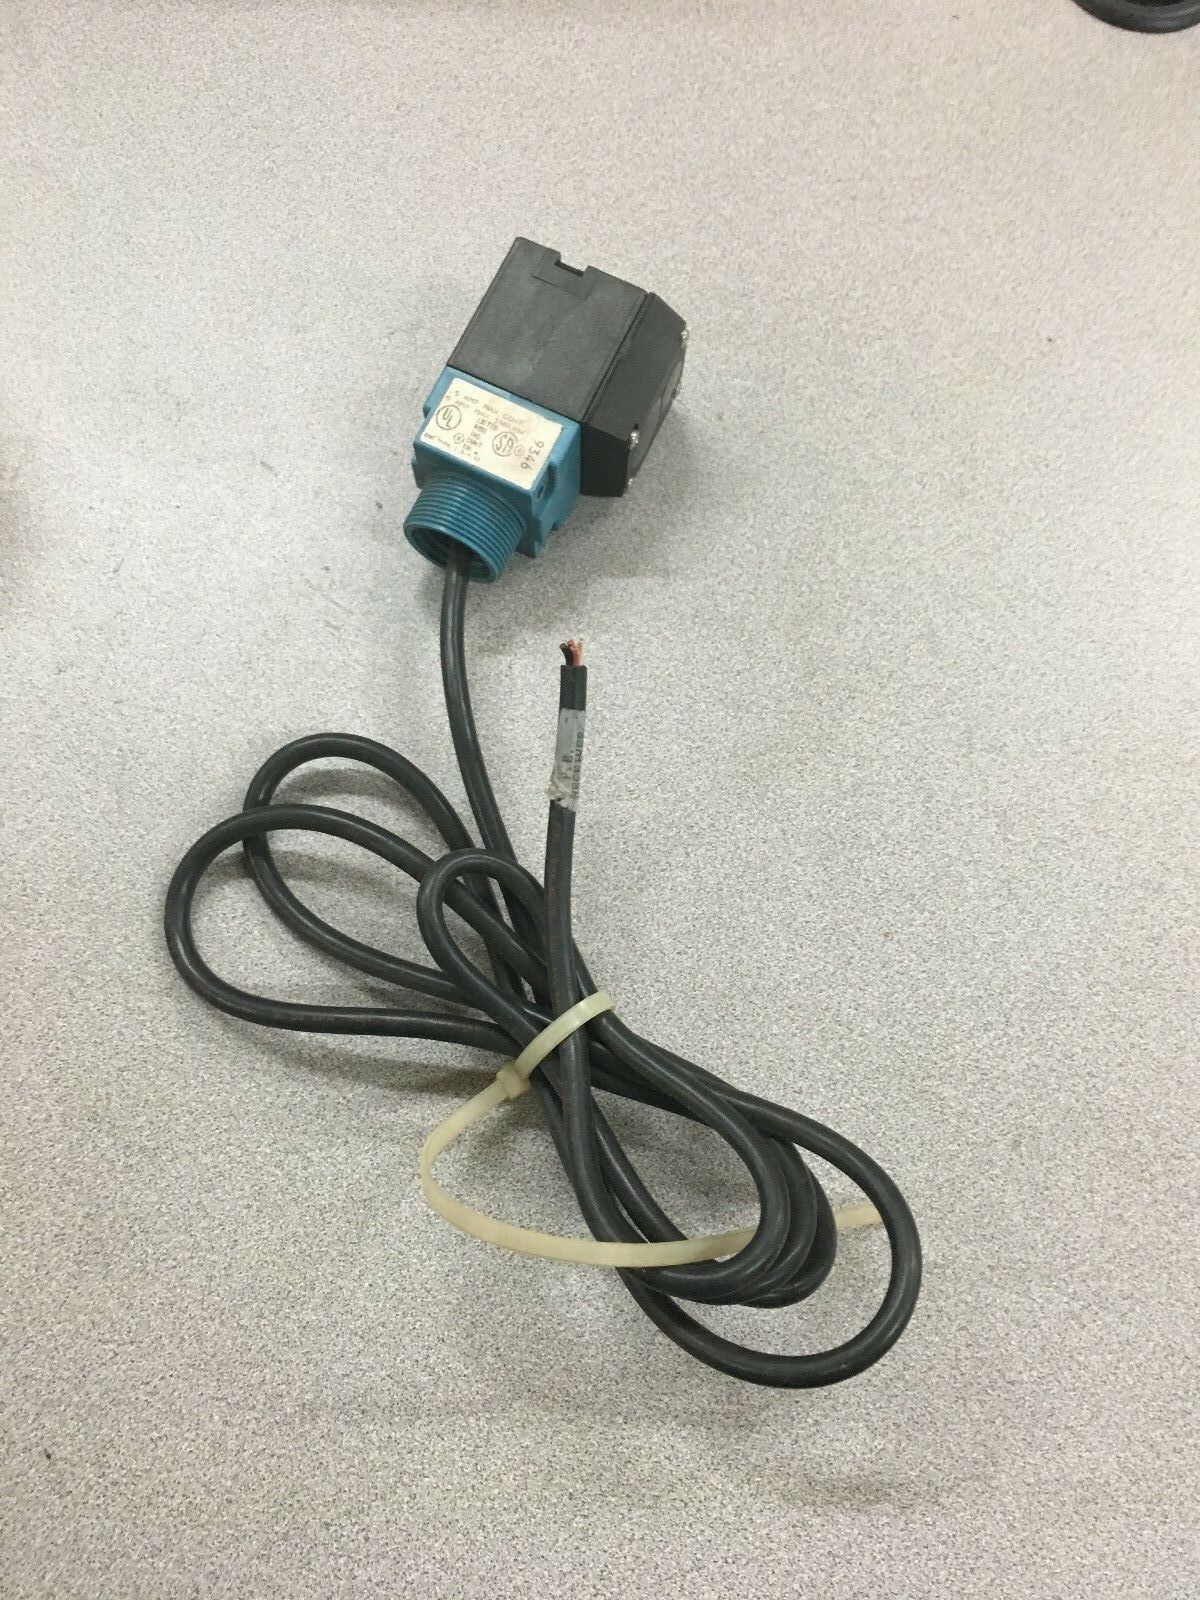 USED MICRO SWITCH MPR6 RECEIVING HEAD SENSOR WITH MPT11 BASE